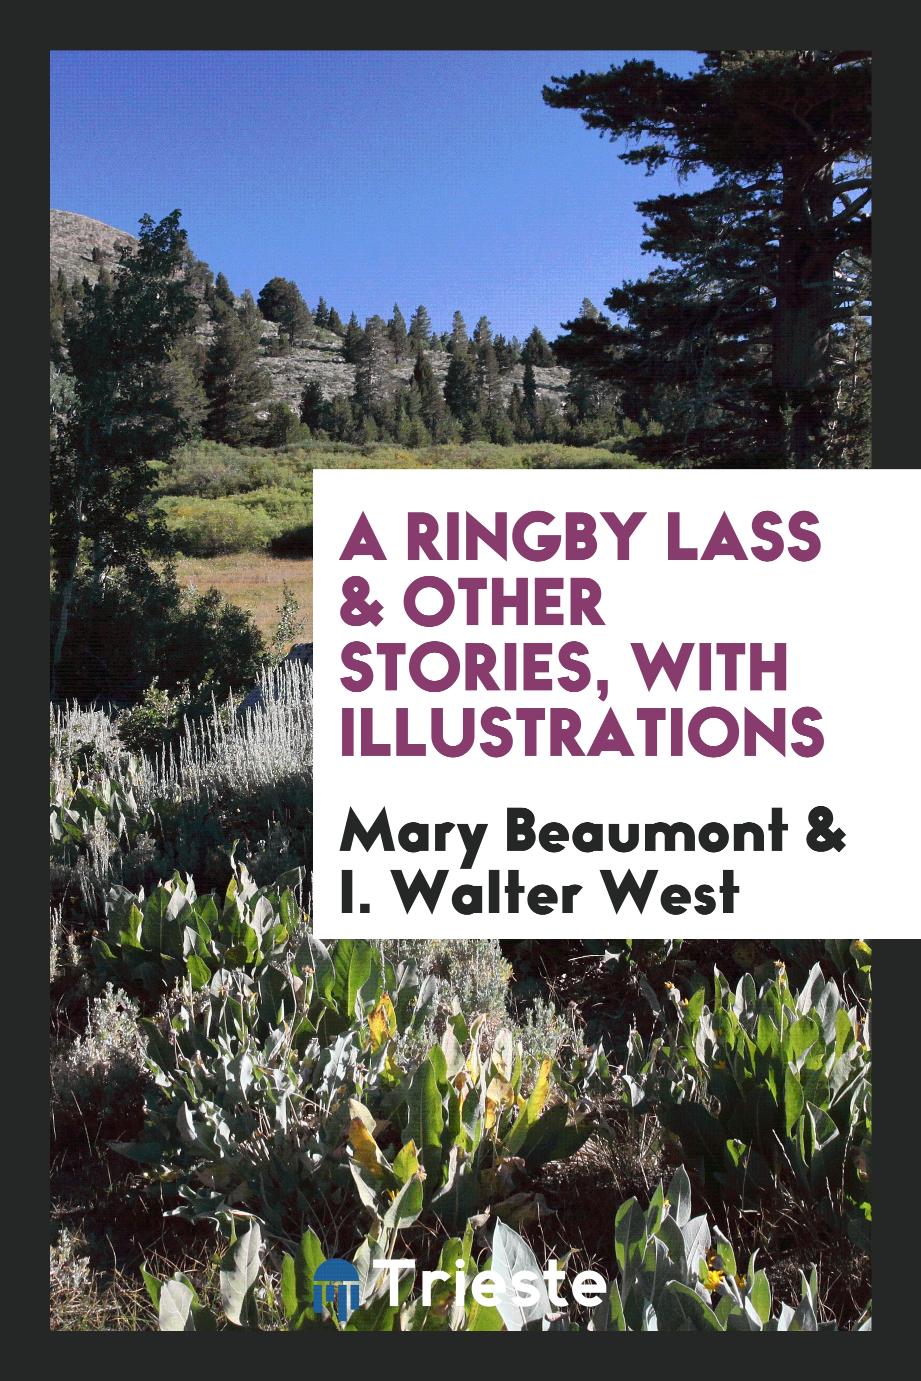 A Ringby Lass & Other Stories, with Illustrations